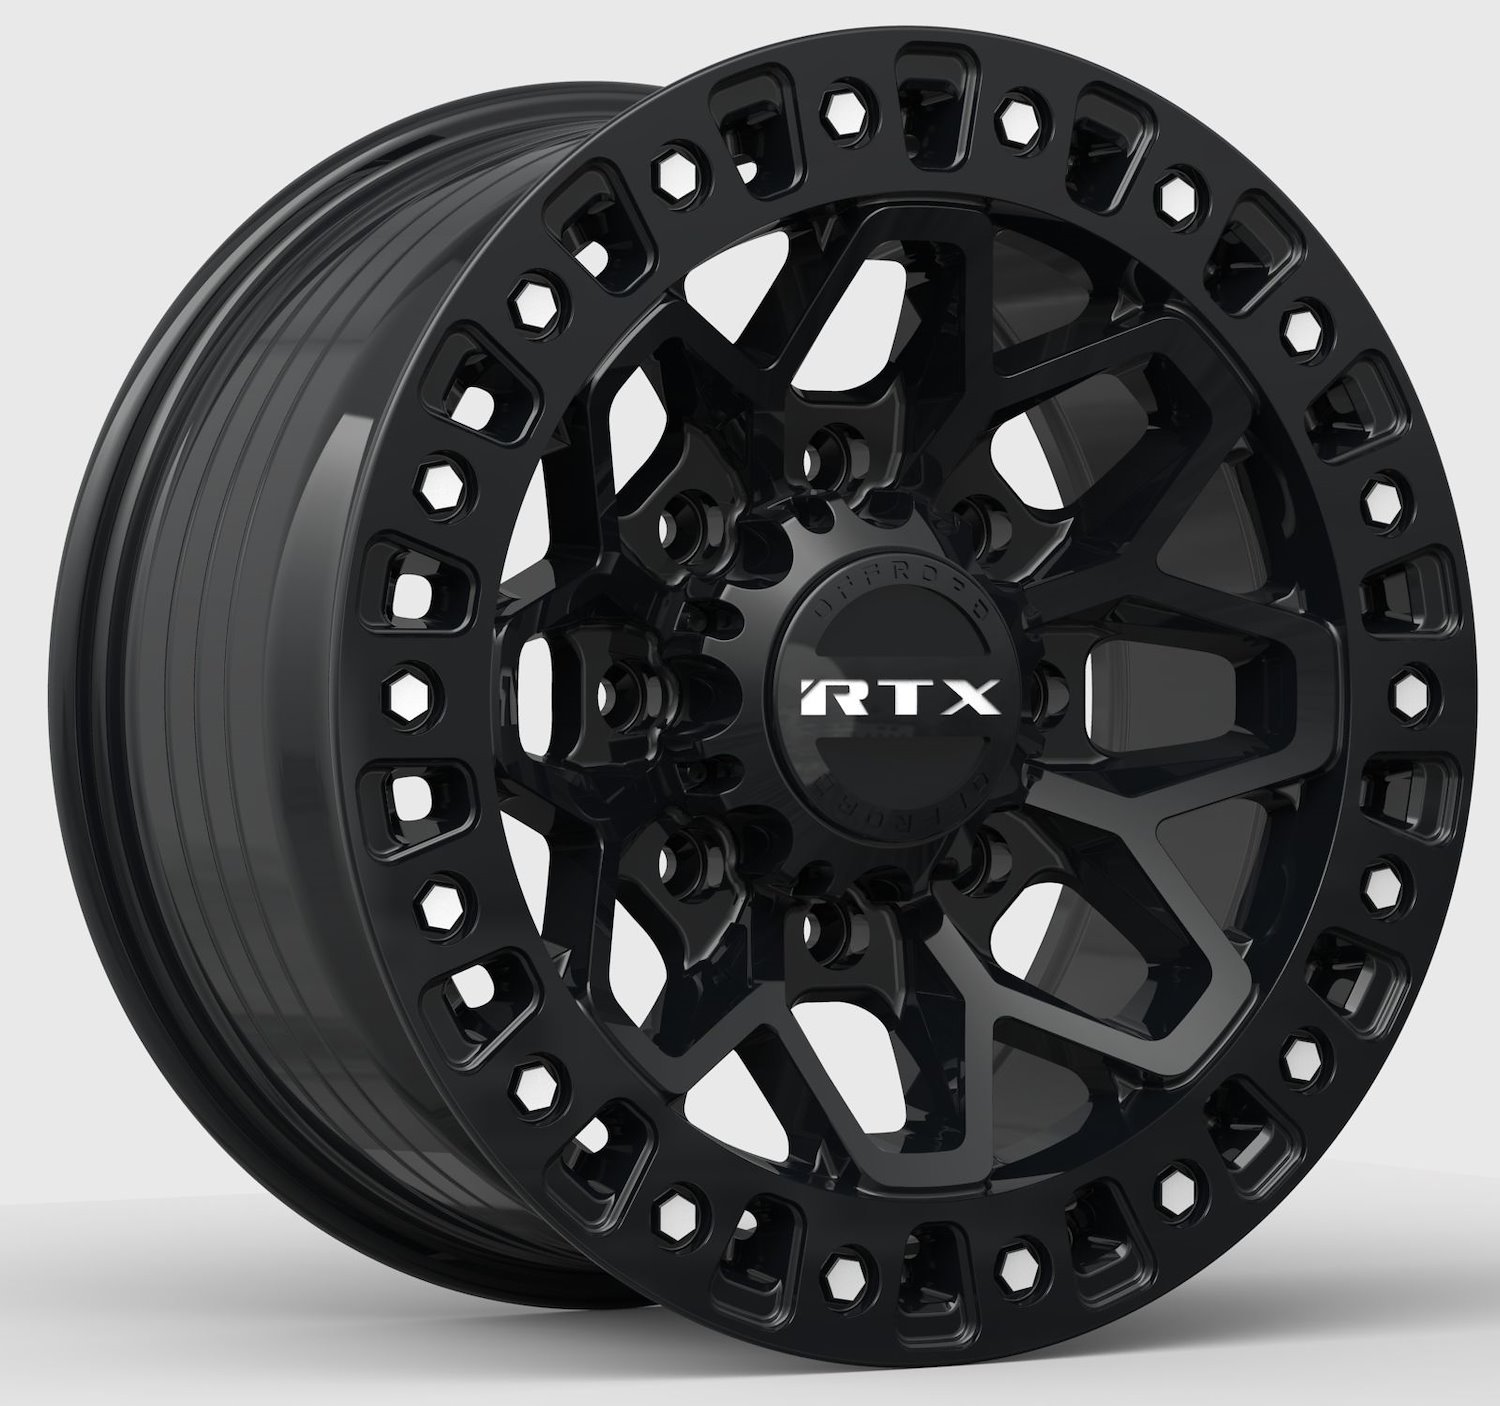 083193 Off-Road Series Zion Wheel [Size: 18" x 9"] Gloss Black Milled Rivets Finish